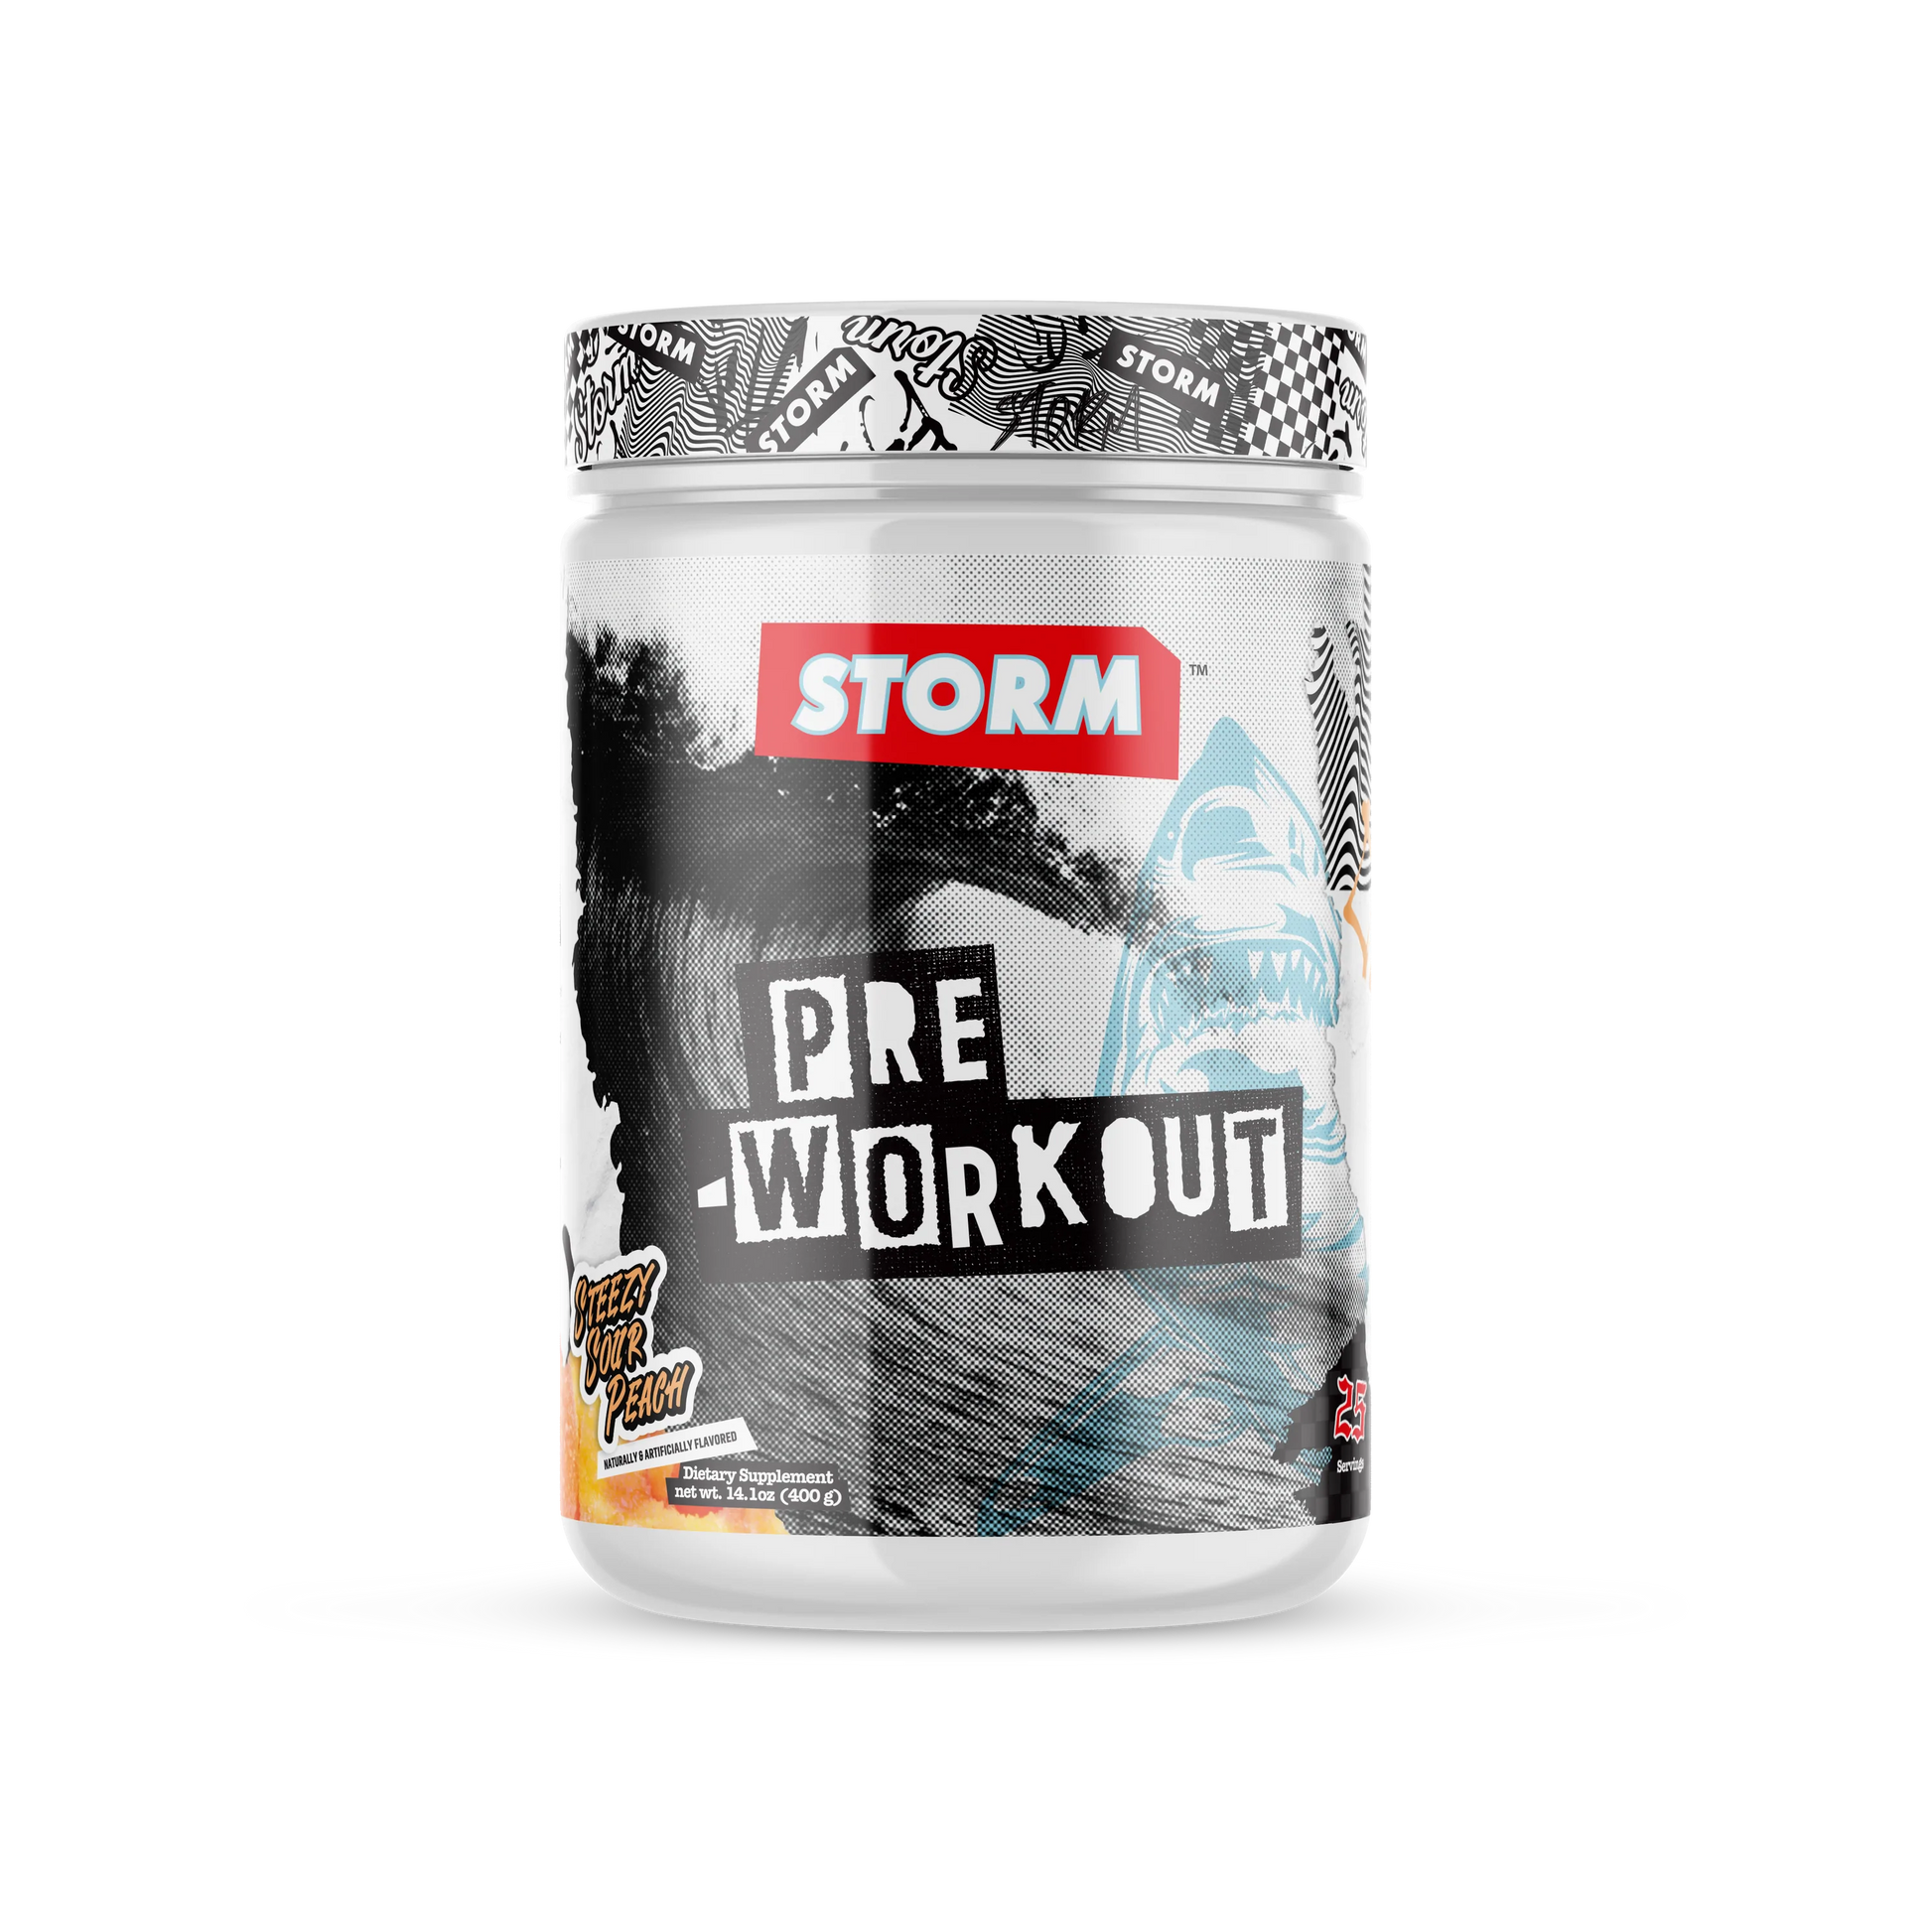 Storm Pre-Workout | Buy 1 Get 1 Free Max Muscle Orlando